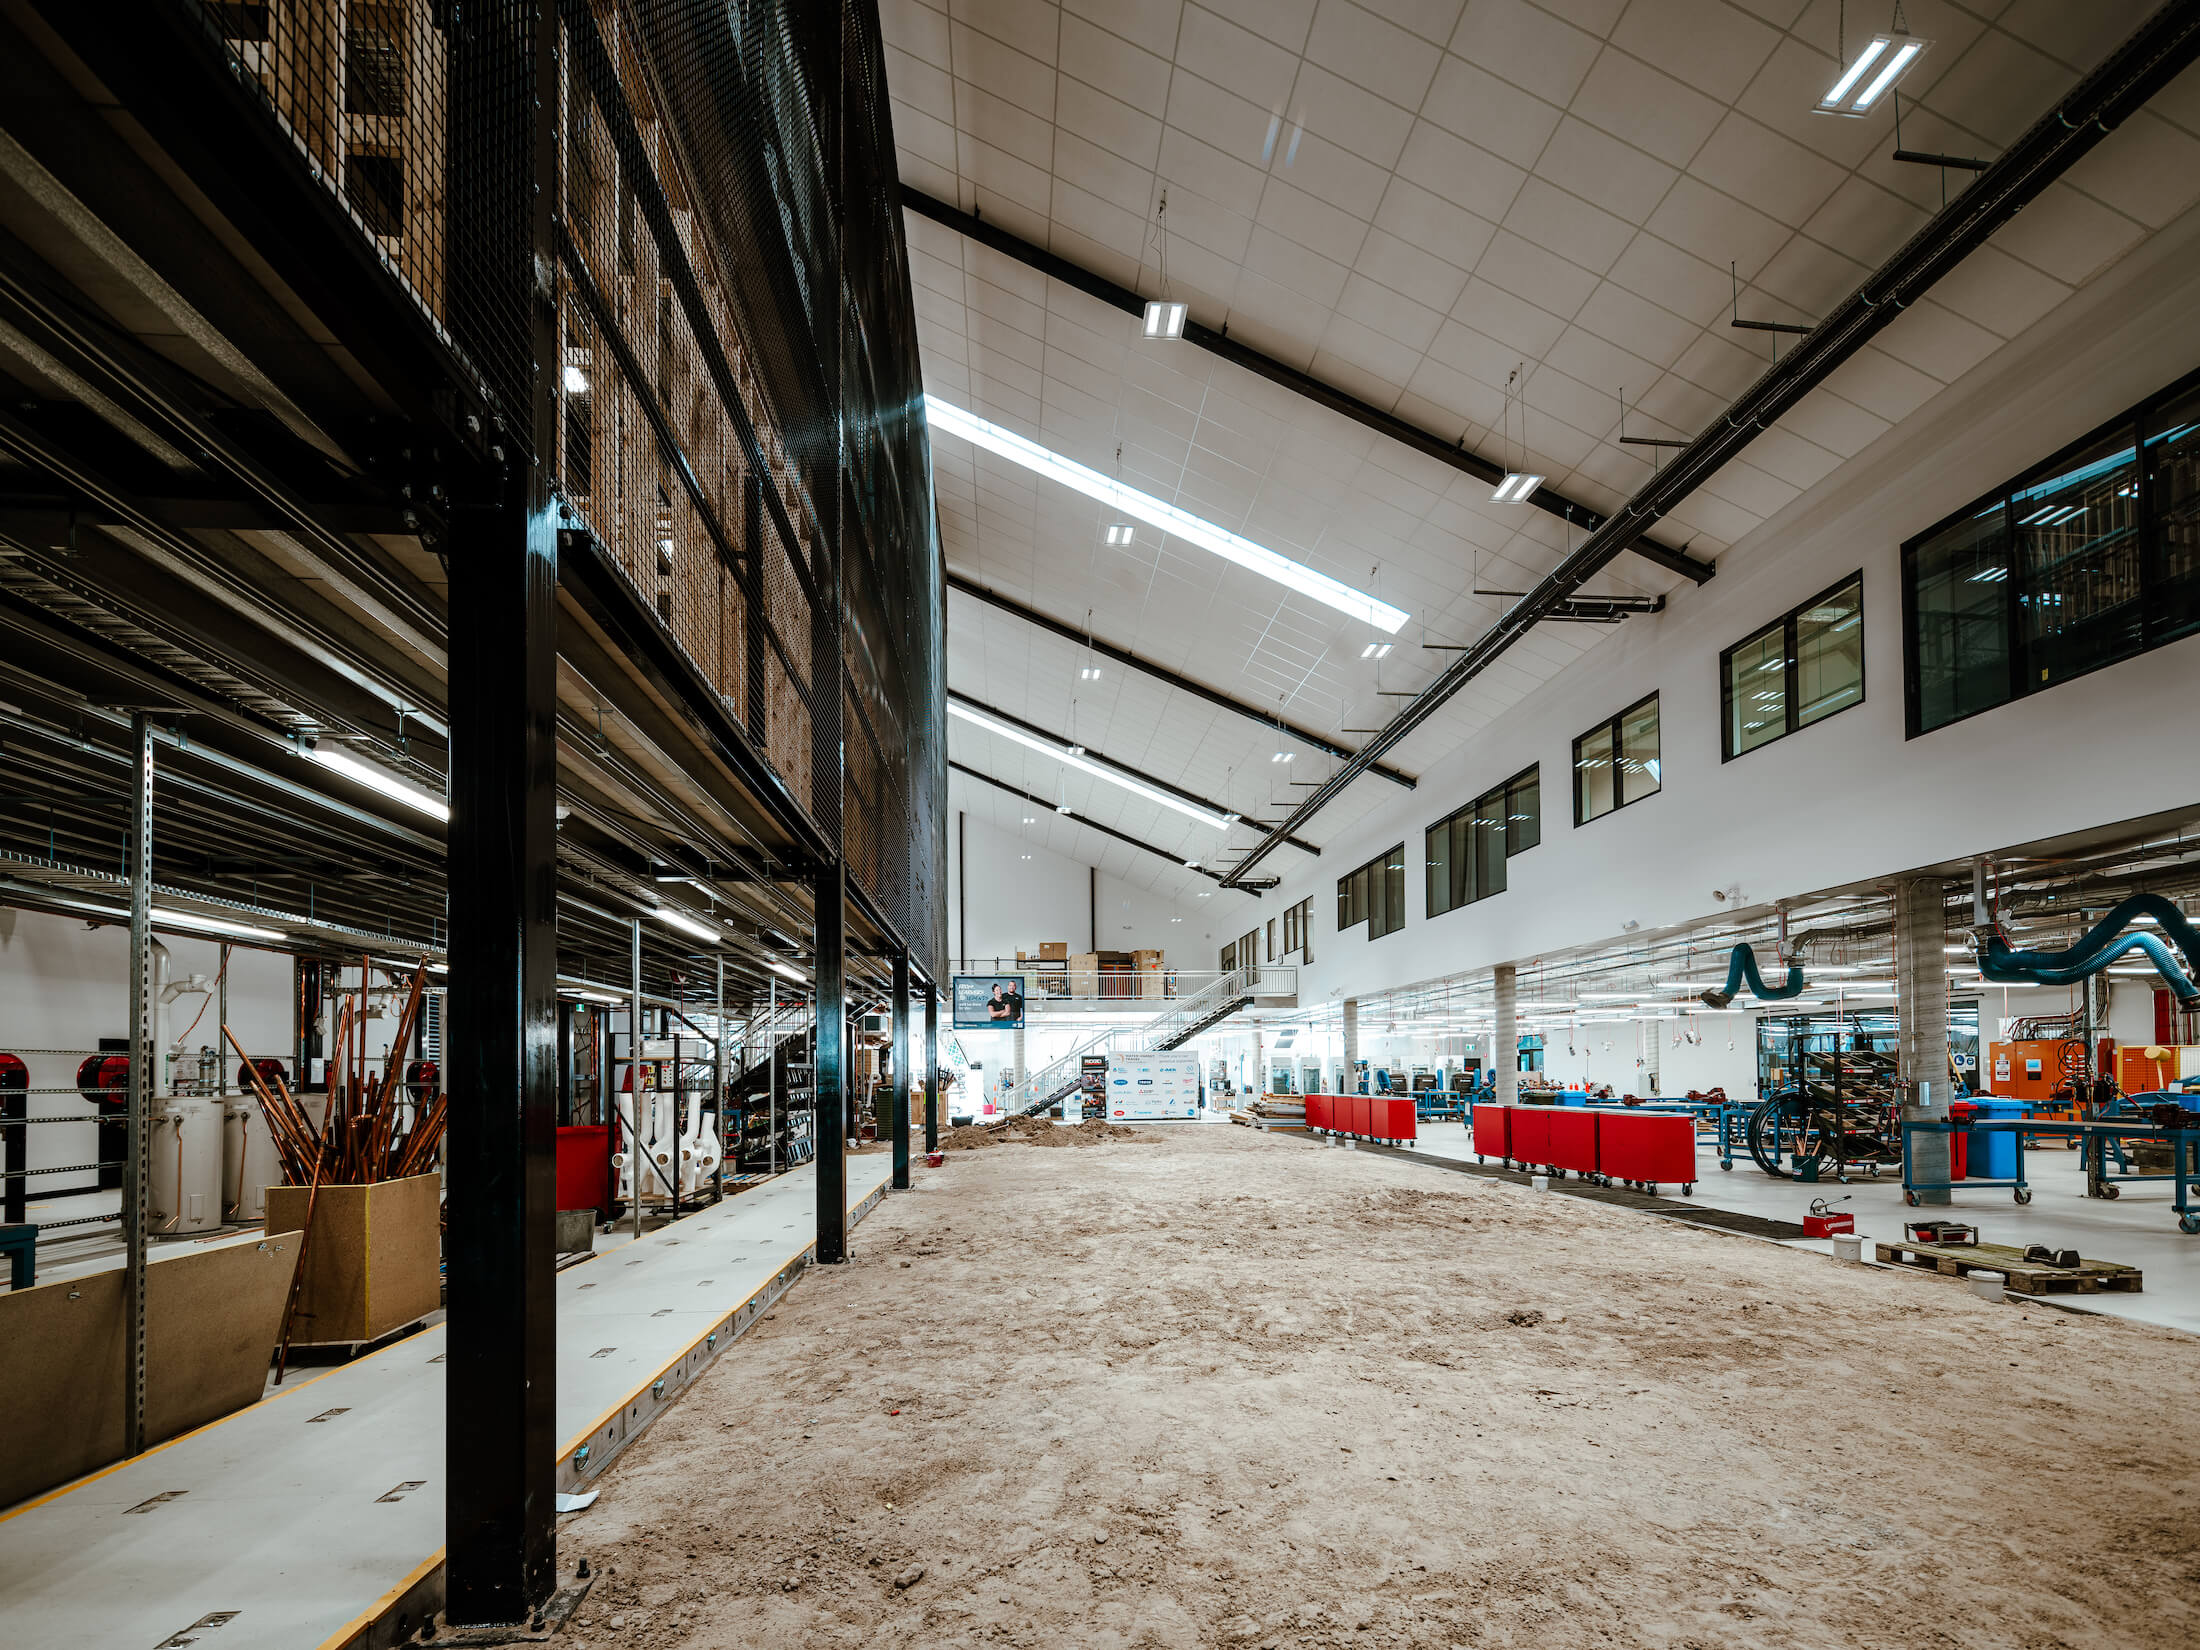 Long internal view of sandpit and multi-level stack inside of a trade training facility.